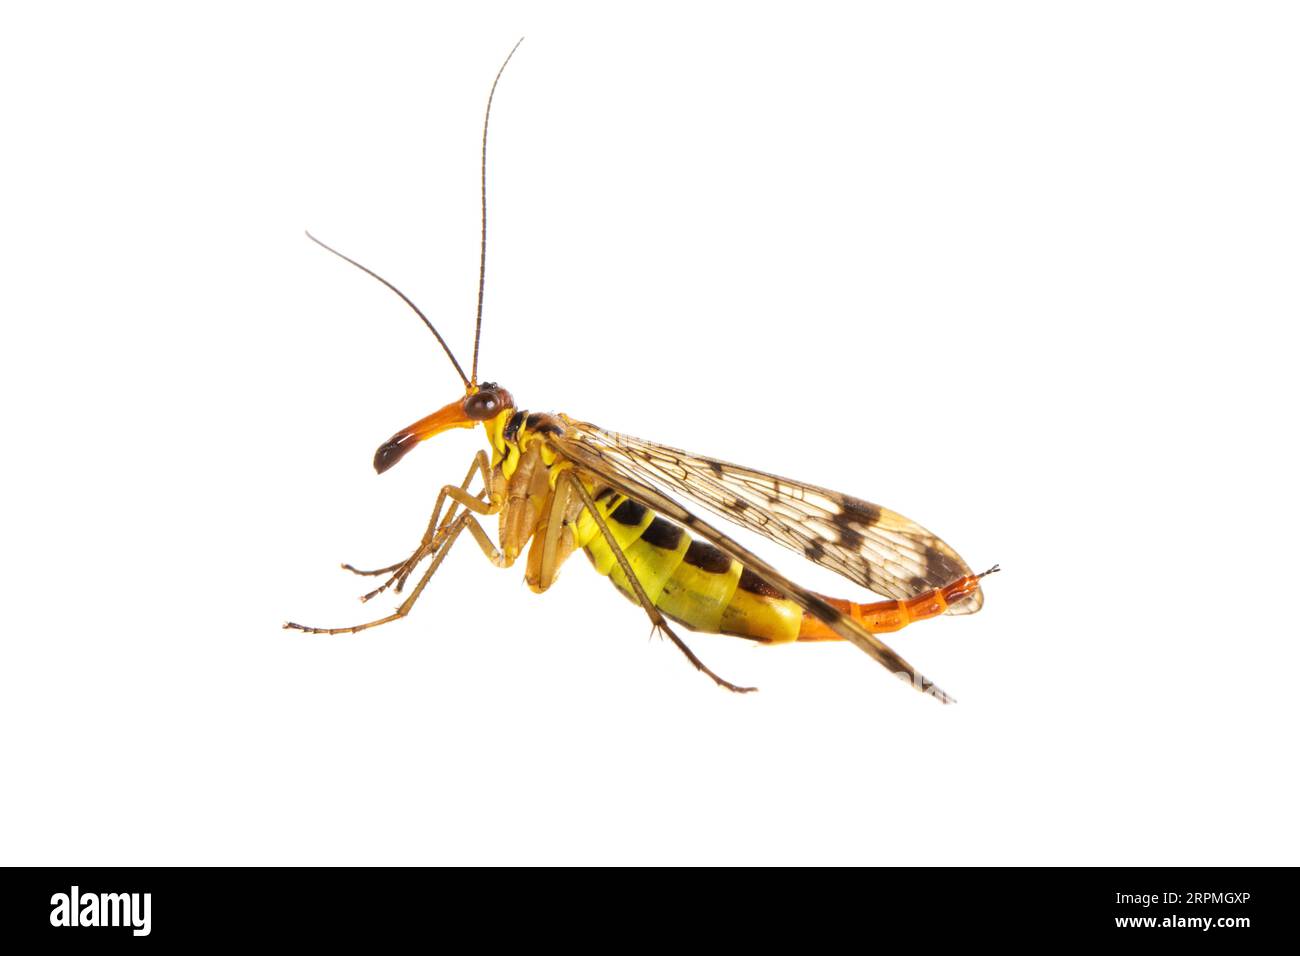 scorpionfly (Panorpa cognata), side view, cut out, Netherlands Stock Photo